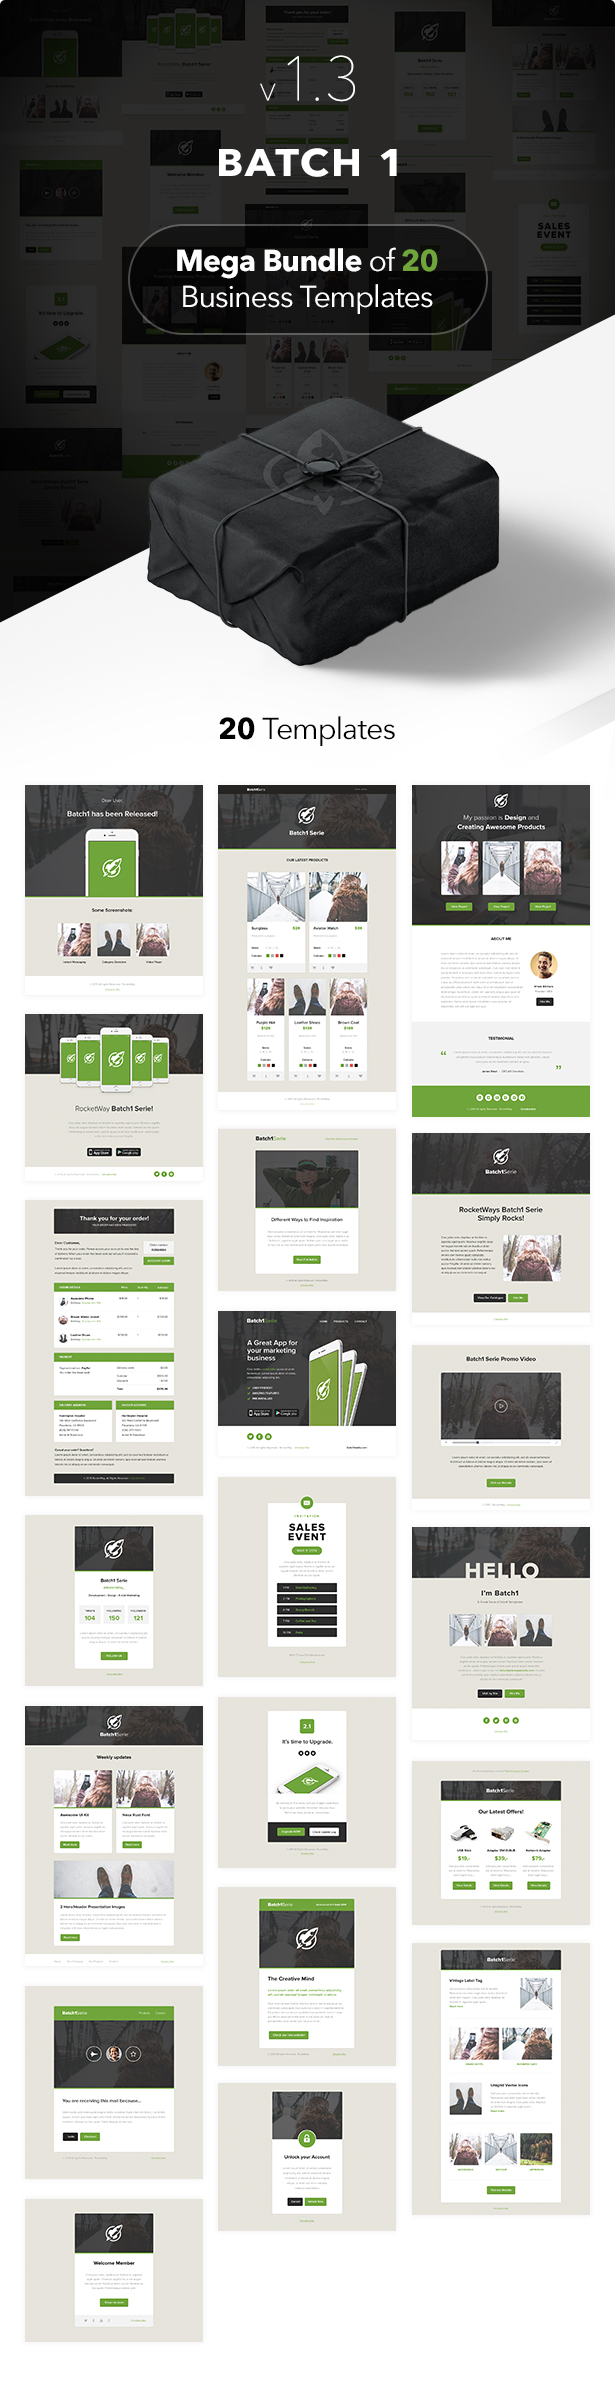 headerelements - Batch1 - Complete Set of 20 Business Email Templates